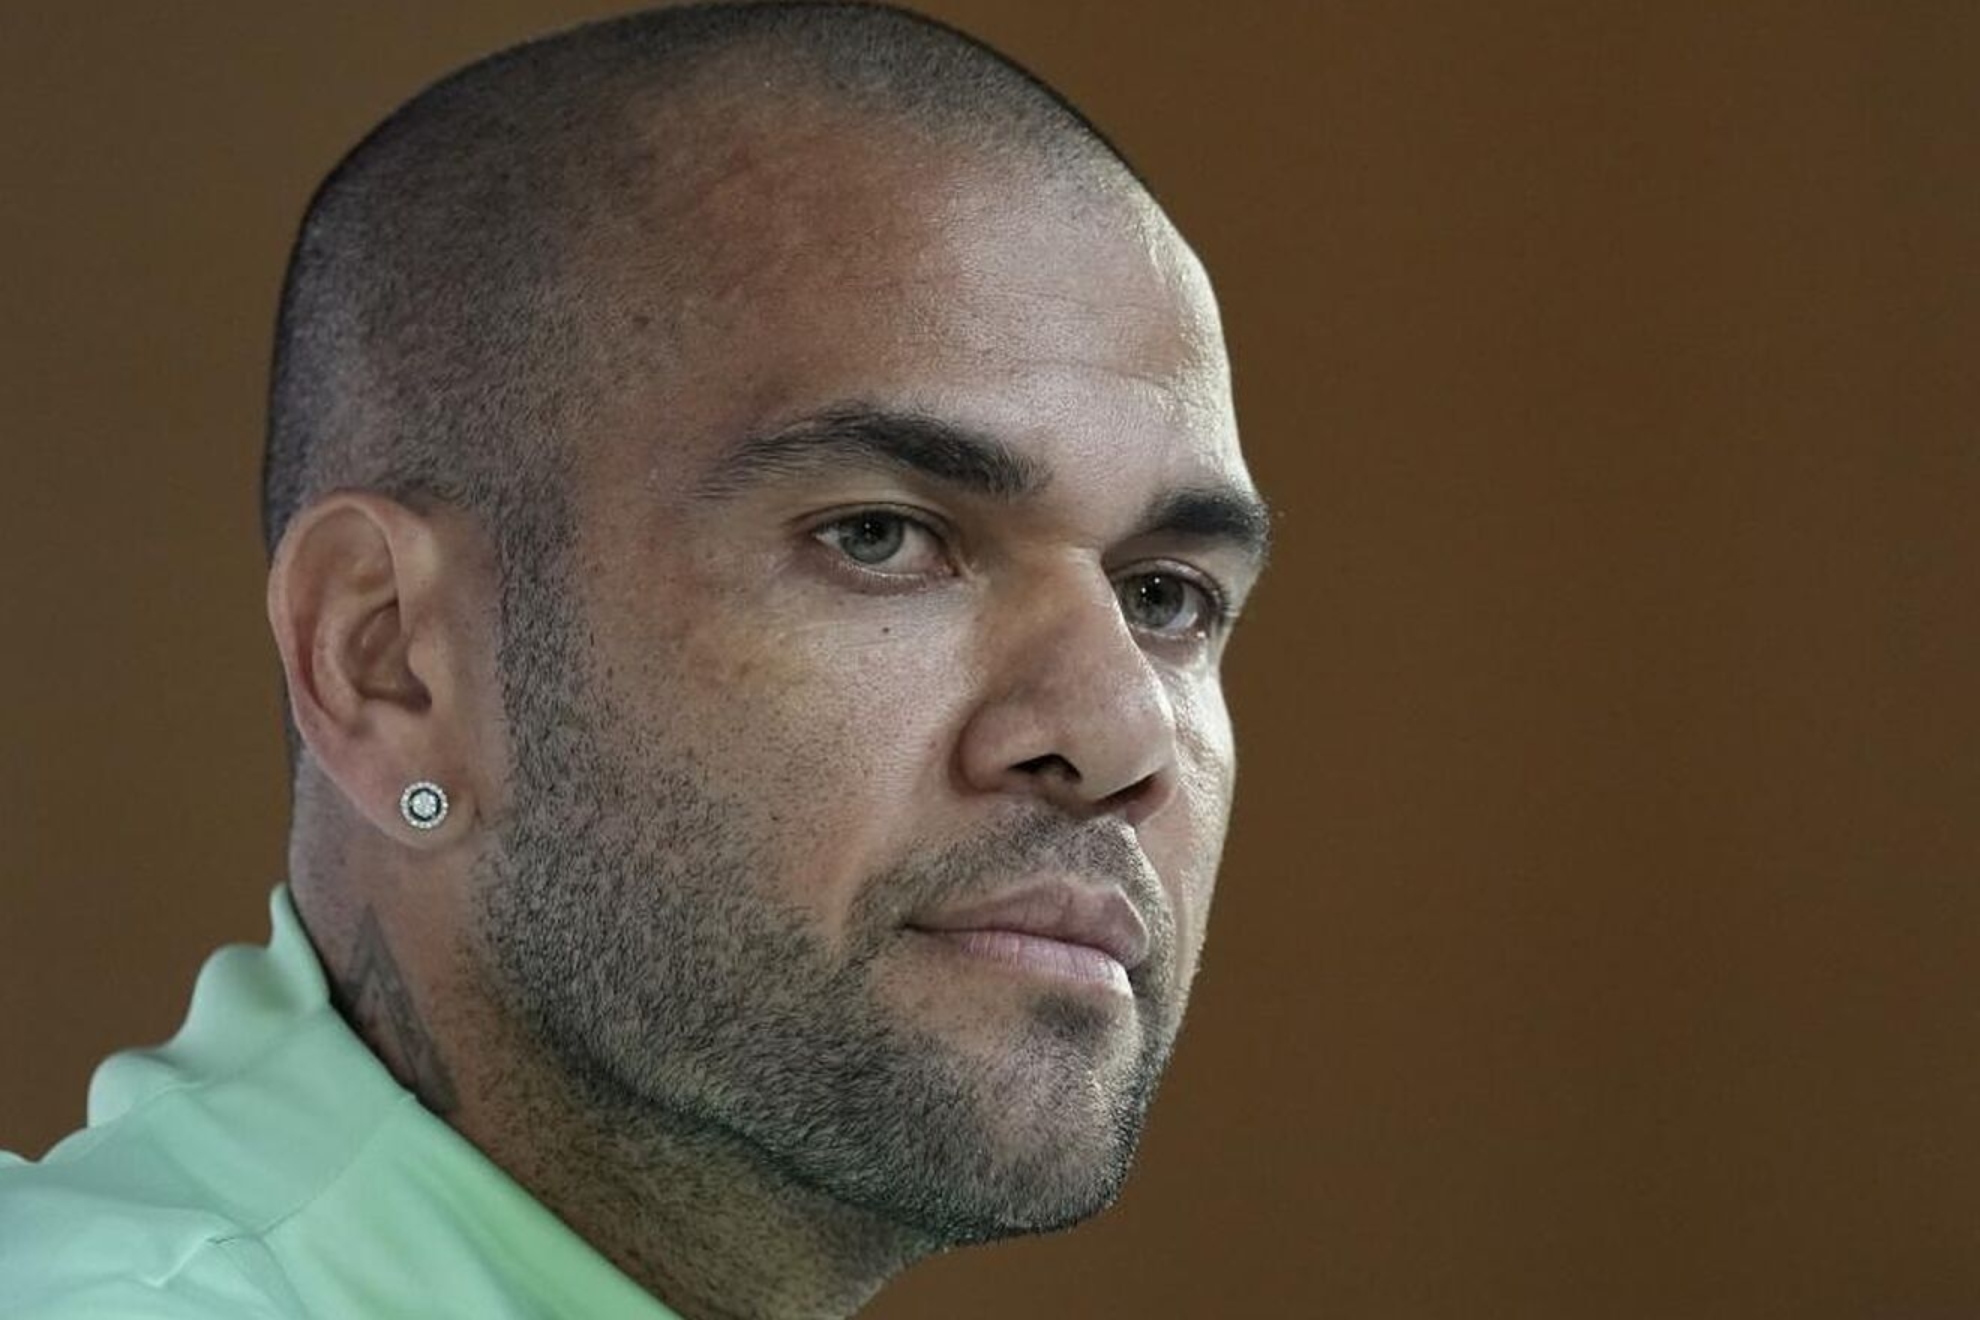 Dani Alves latest statement revealed: I asked her twice if she liked it and she said yes